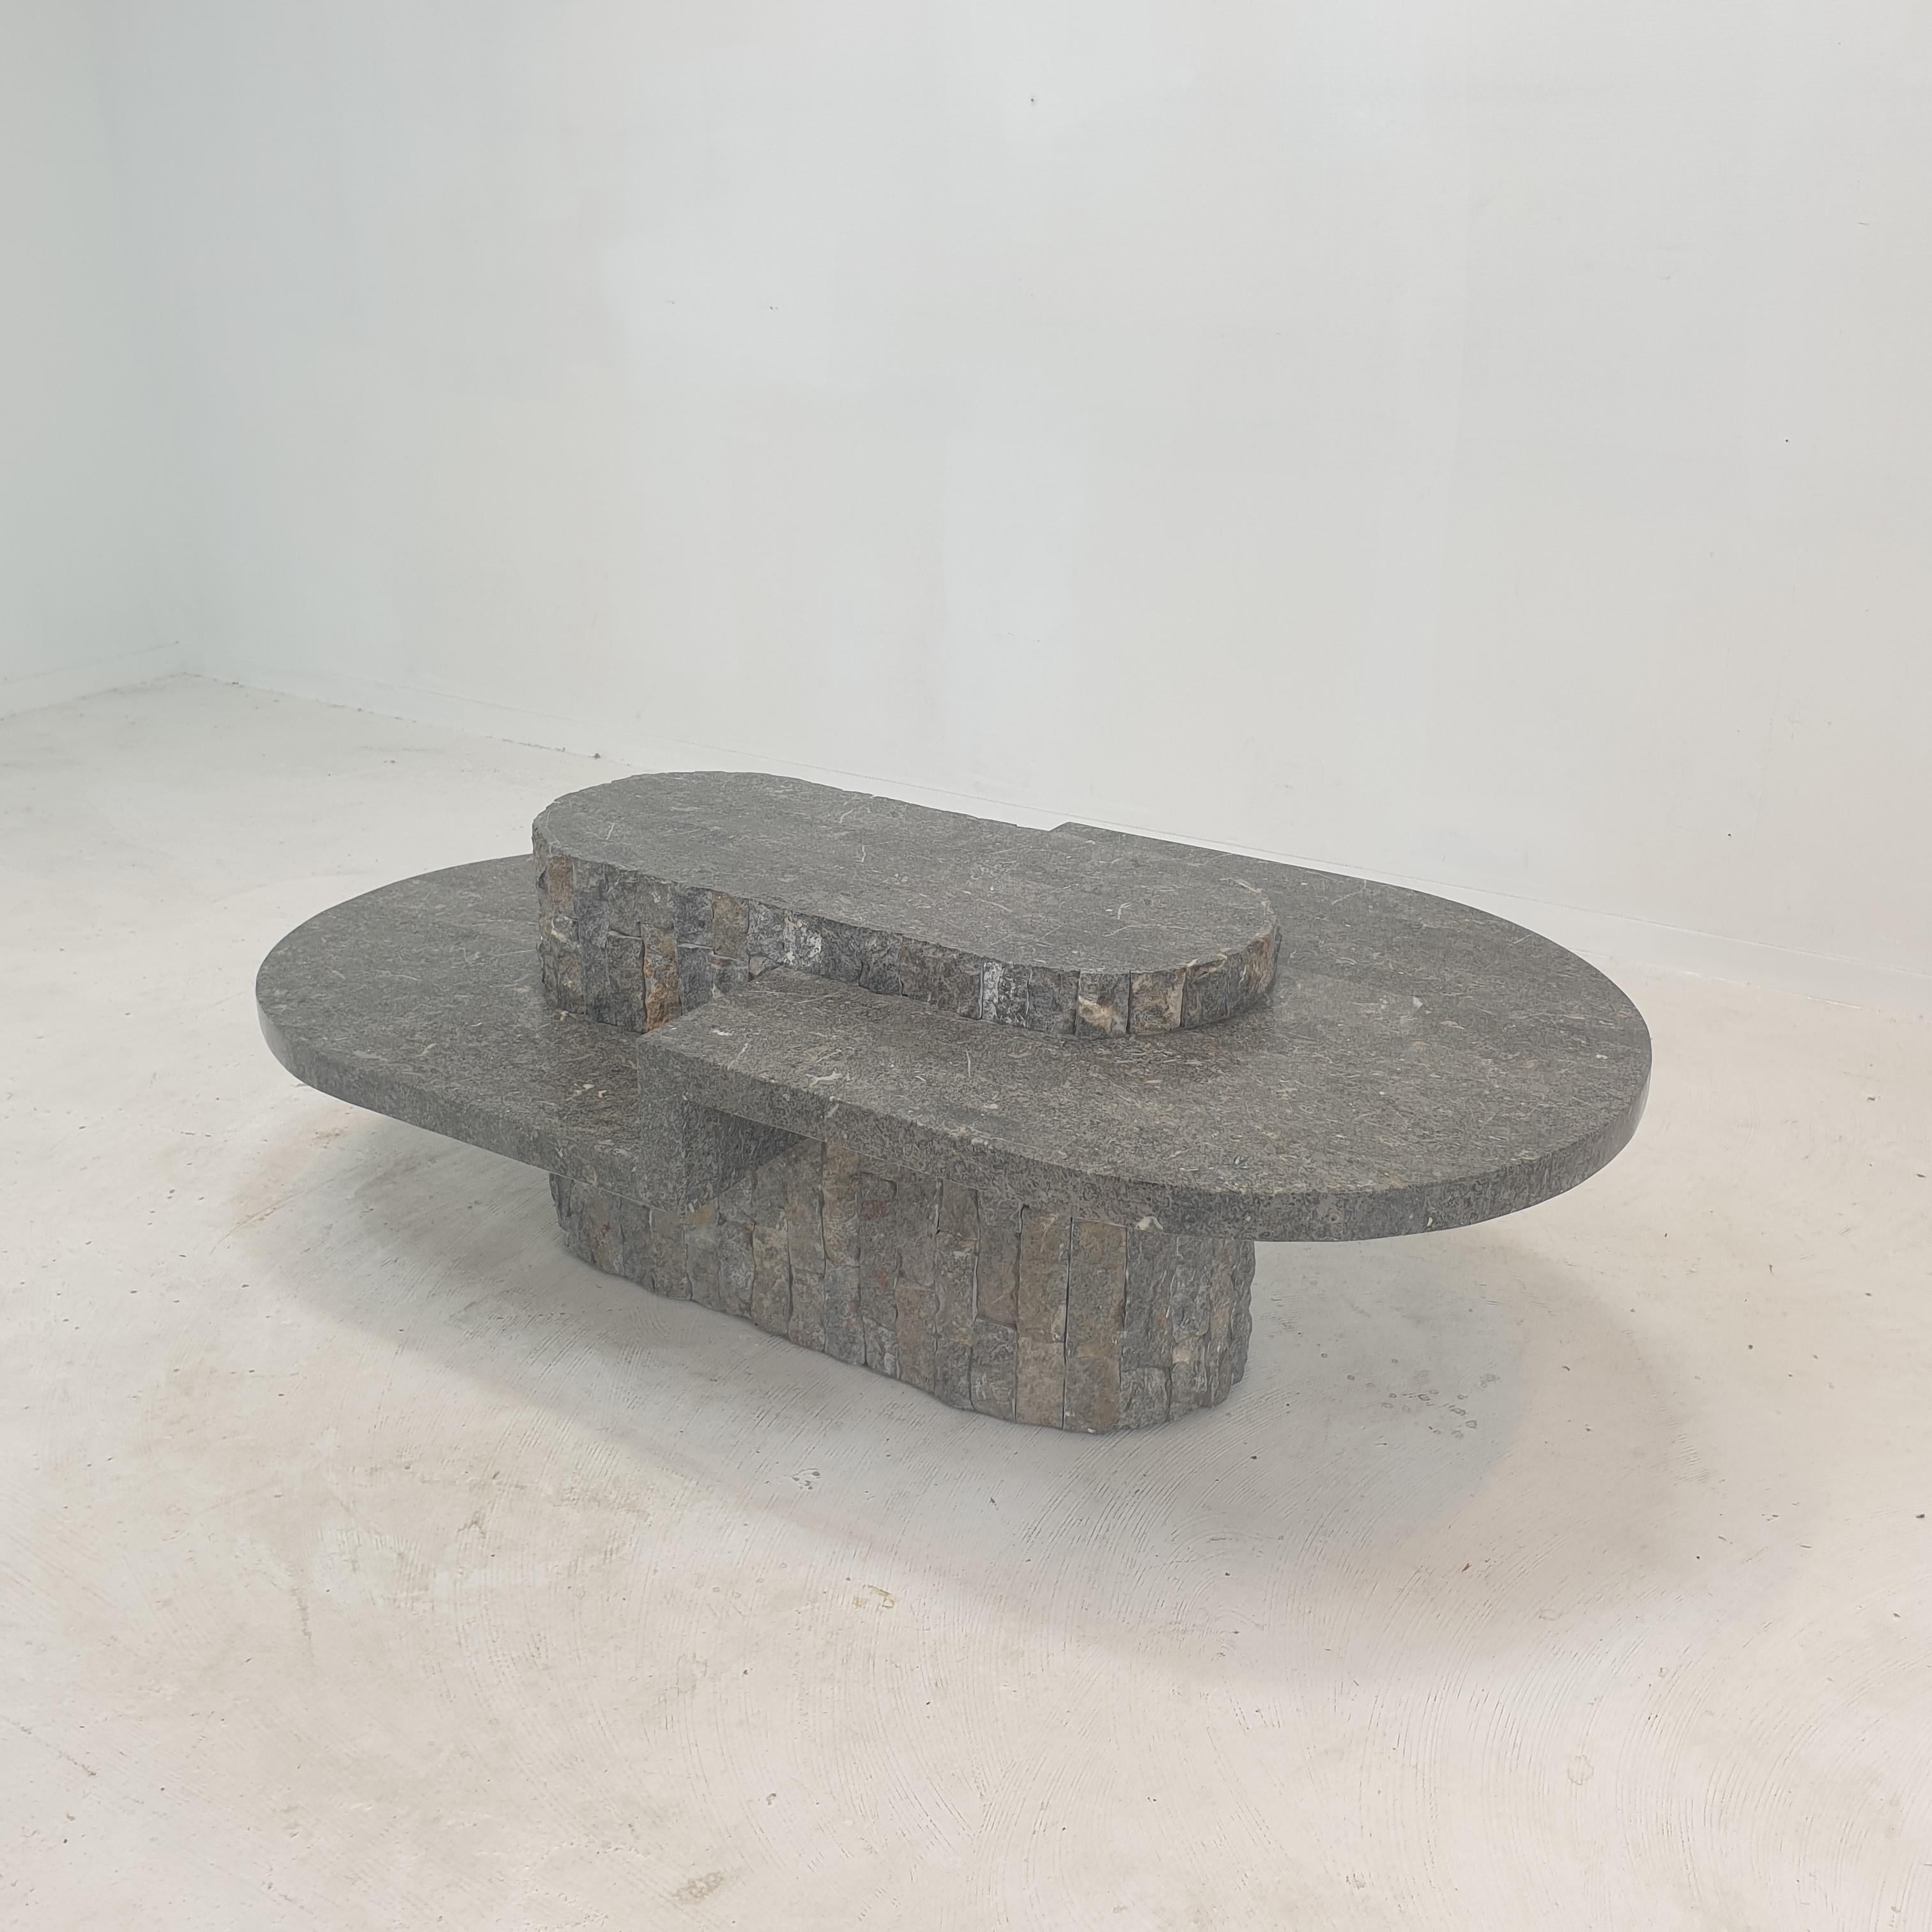 Post-Modern Magnussen Ponte Mactan Stone or Fossil Stone Coffee Table, 1980s For Sale